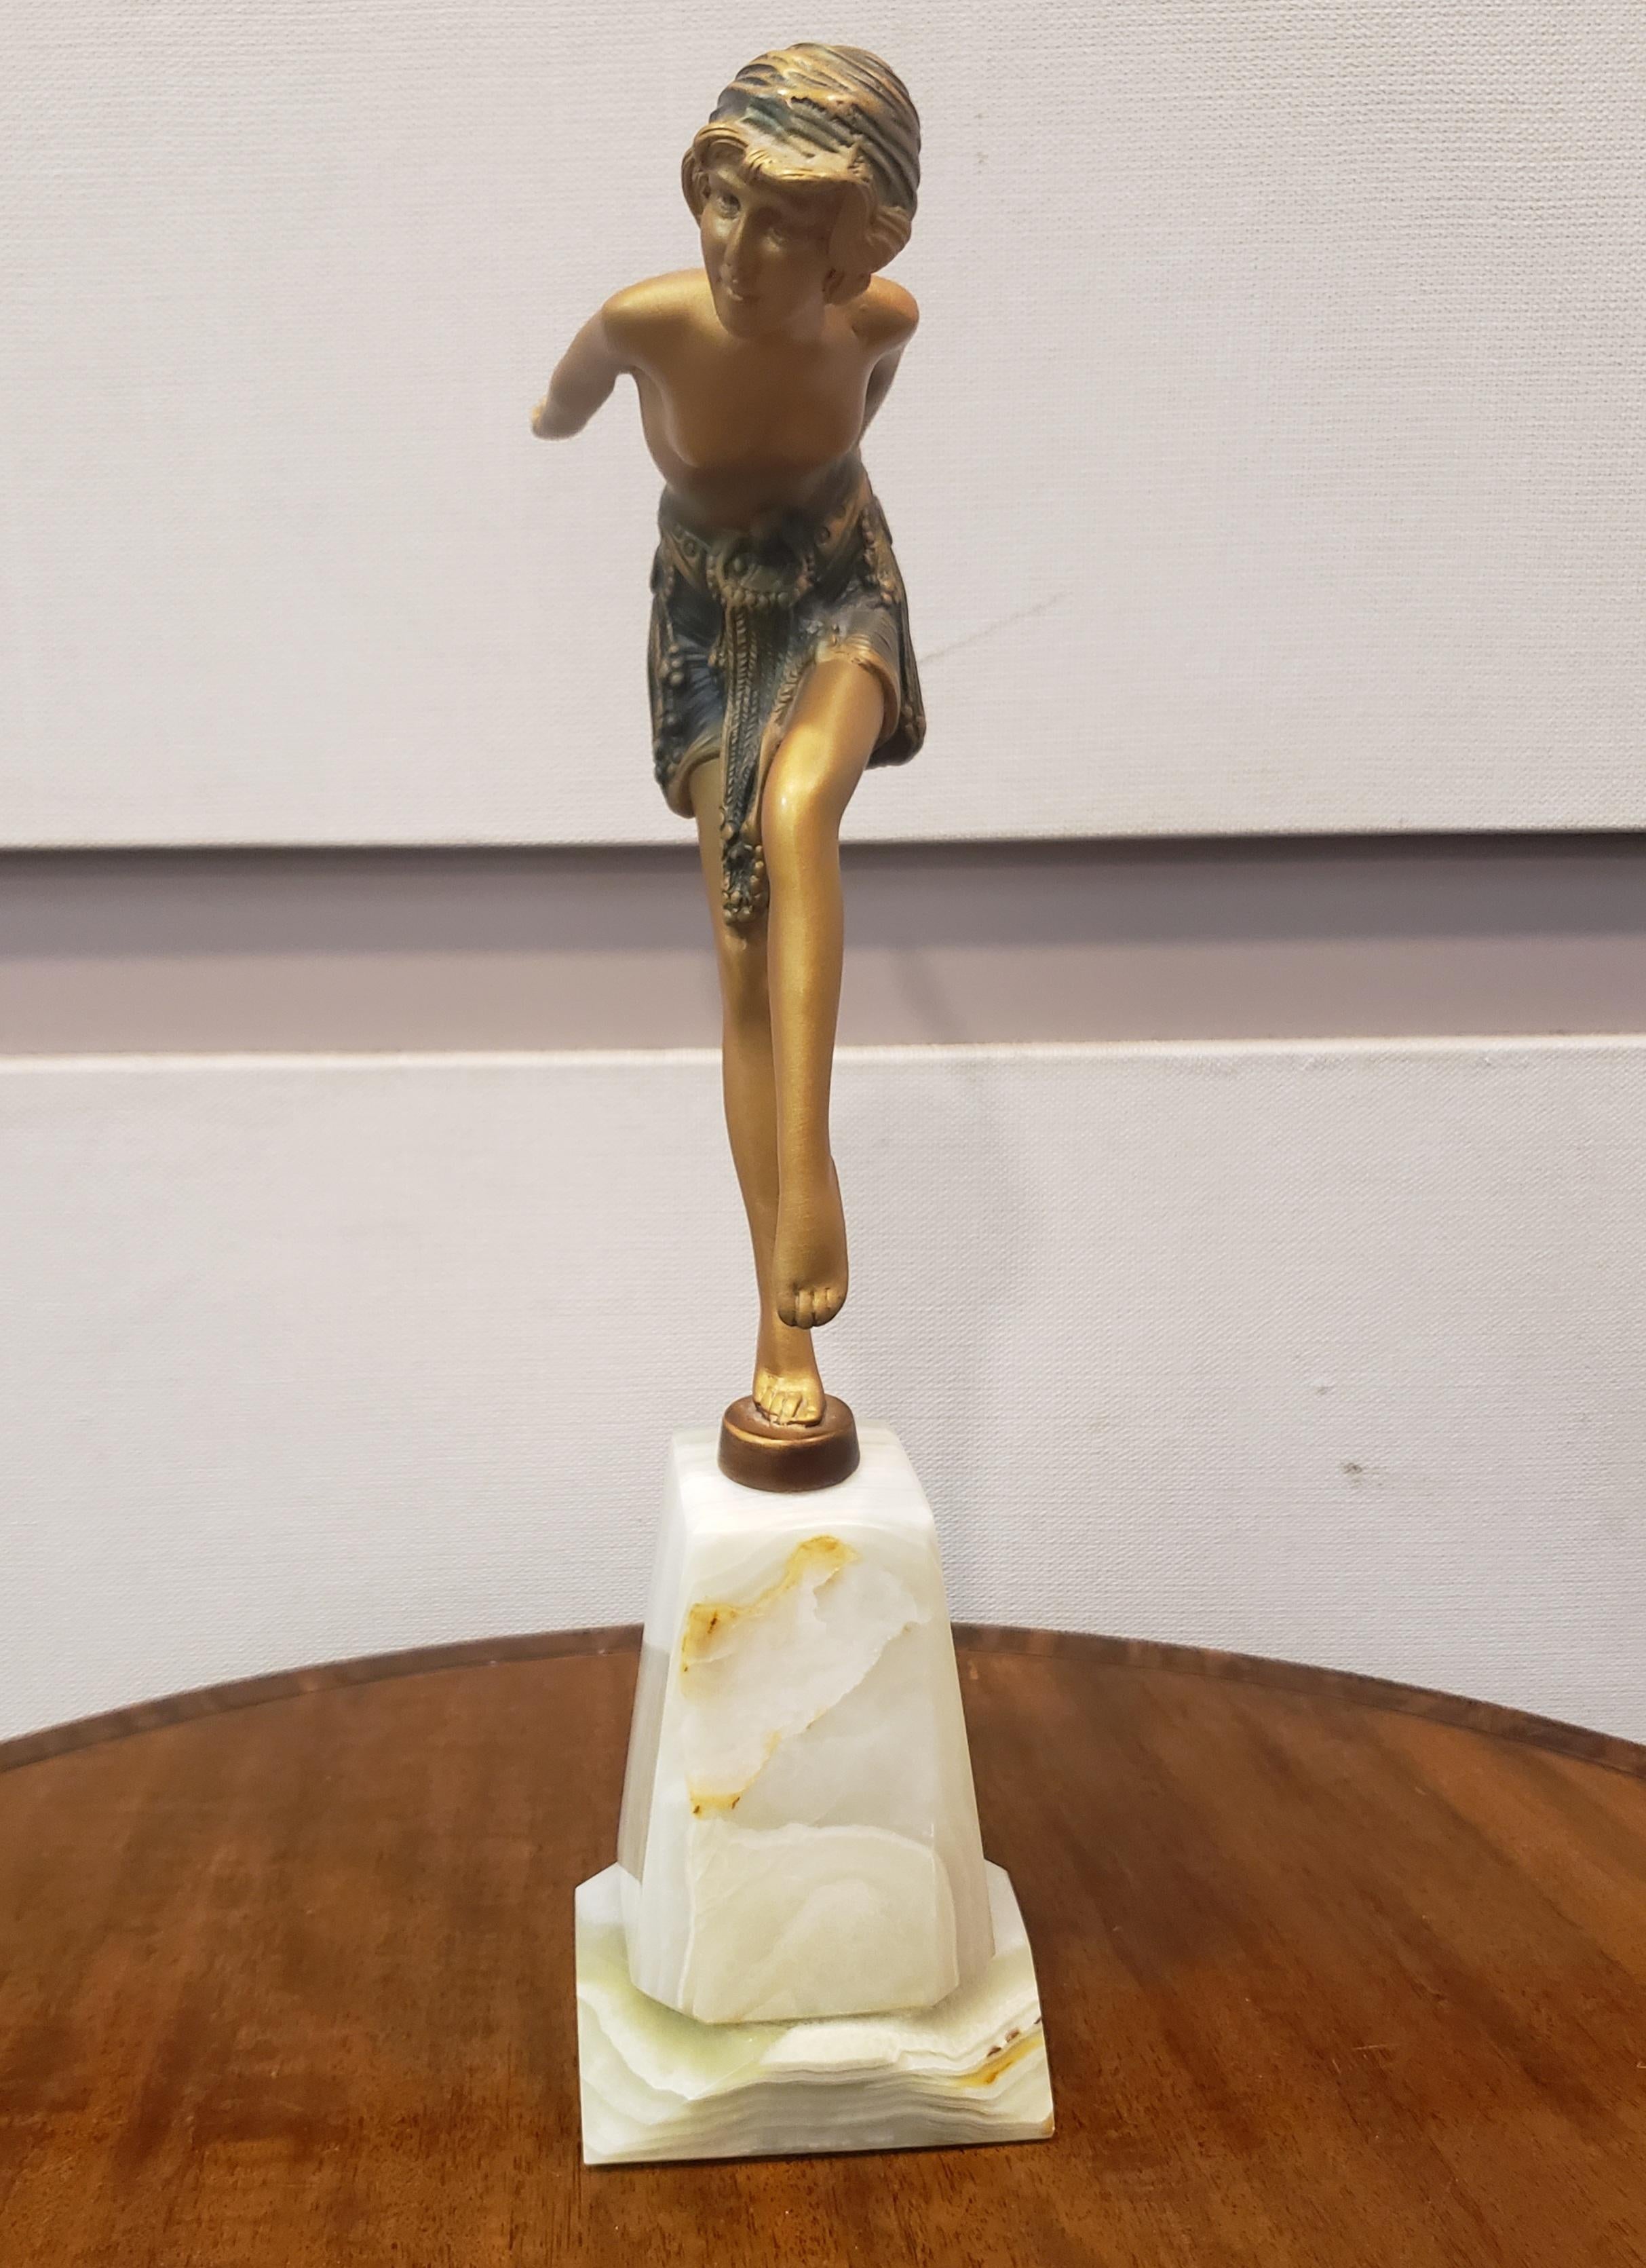 An attractive 20th Century Art Deco cold painted bronze figure of a dancer with her arms rearstretched in an elegant pose. The sculpture exhibits excellent colour and very fine hand finished surface detail, raised on a tower onyx base.